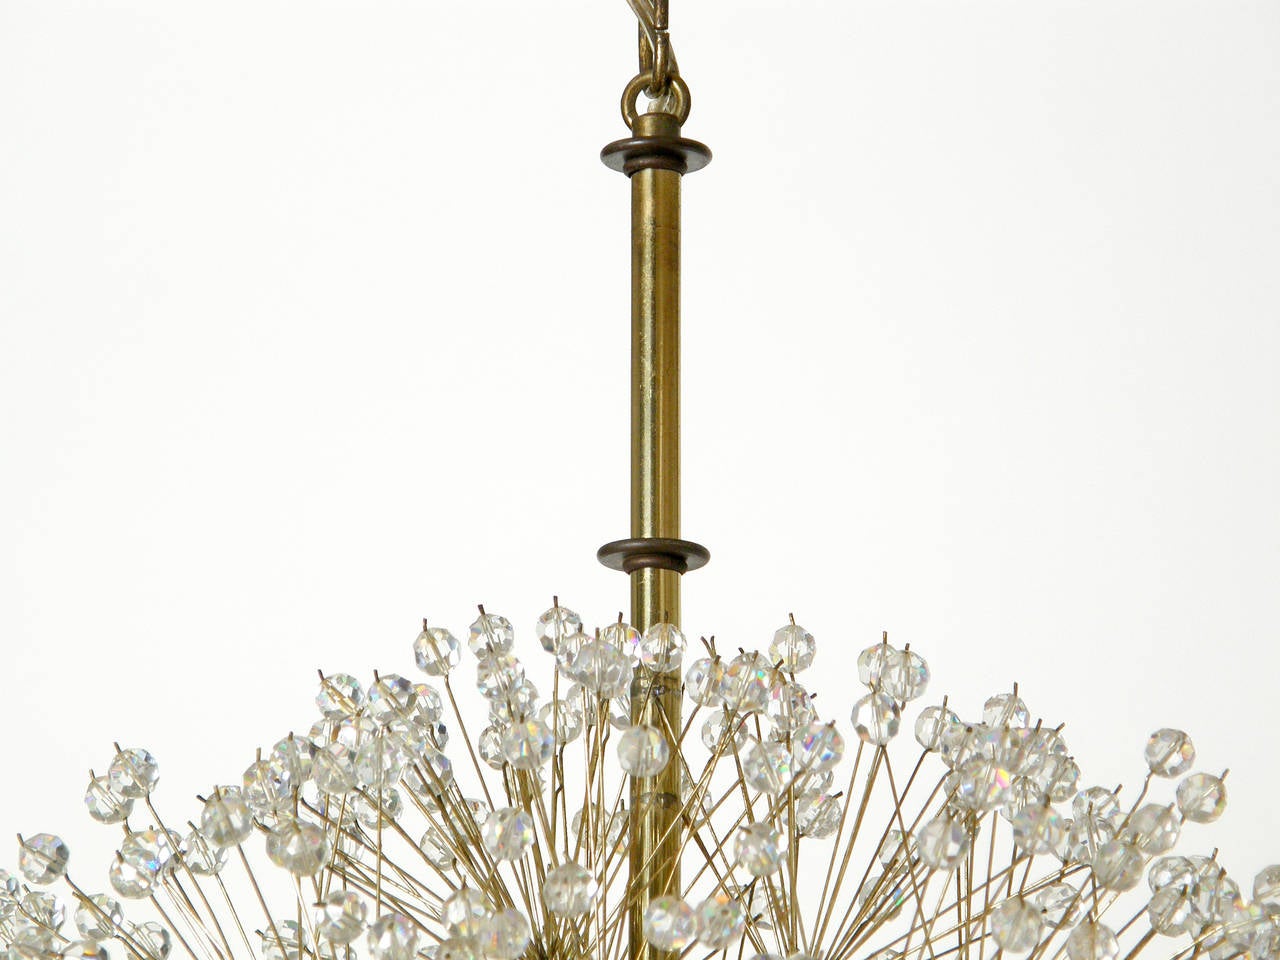 Ceiling fixture in the form of a dandelion clock, in the style of Emil Stejnar. Studded with facetted crystals, this chandelier is a sparkling orb when lit.

sphere- 18